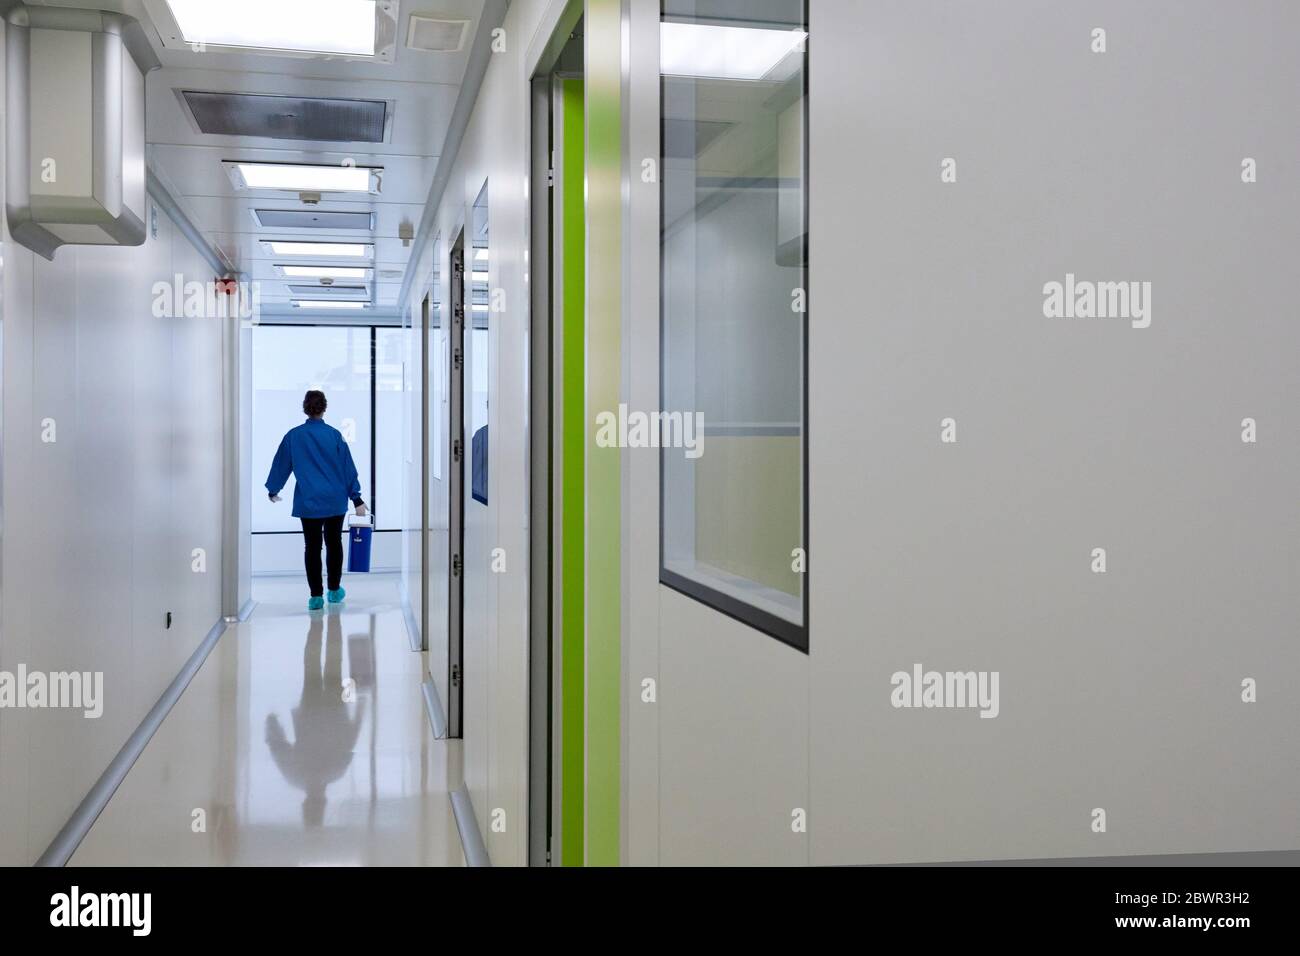 Lab, Clean room, Pharmaceutical plant, Drug manufacturing plant, Research Center, Stock Photo